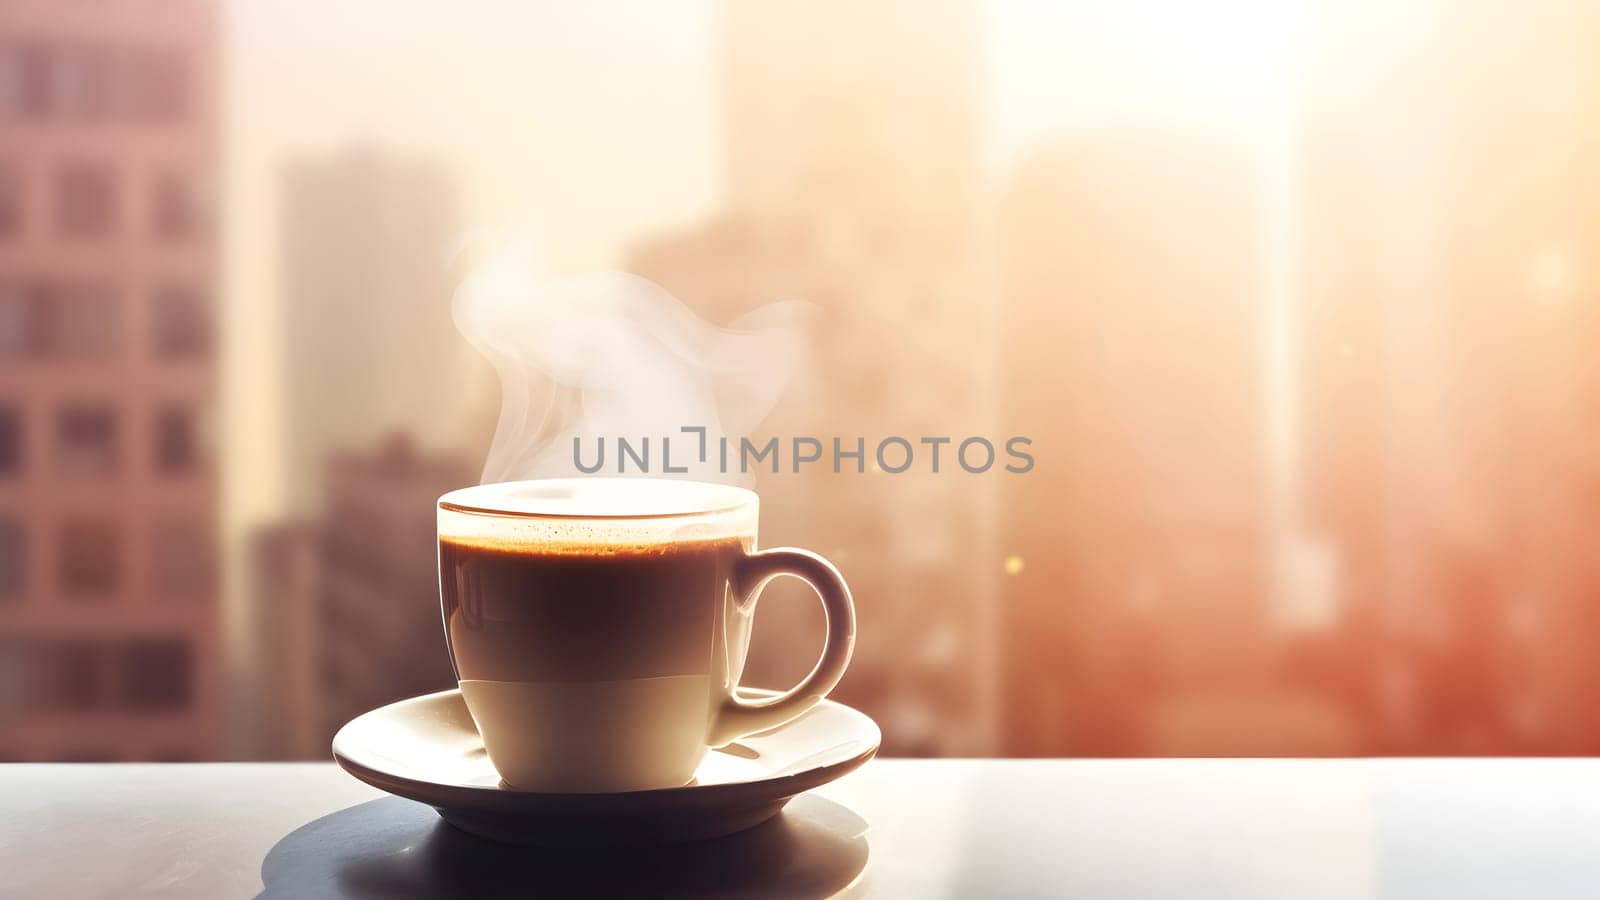 hot coffee cup on windowsill with blurry morning city in the background. Neural network generated in May 2023. Not based on any actual person, scene or pattern.